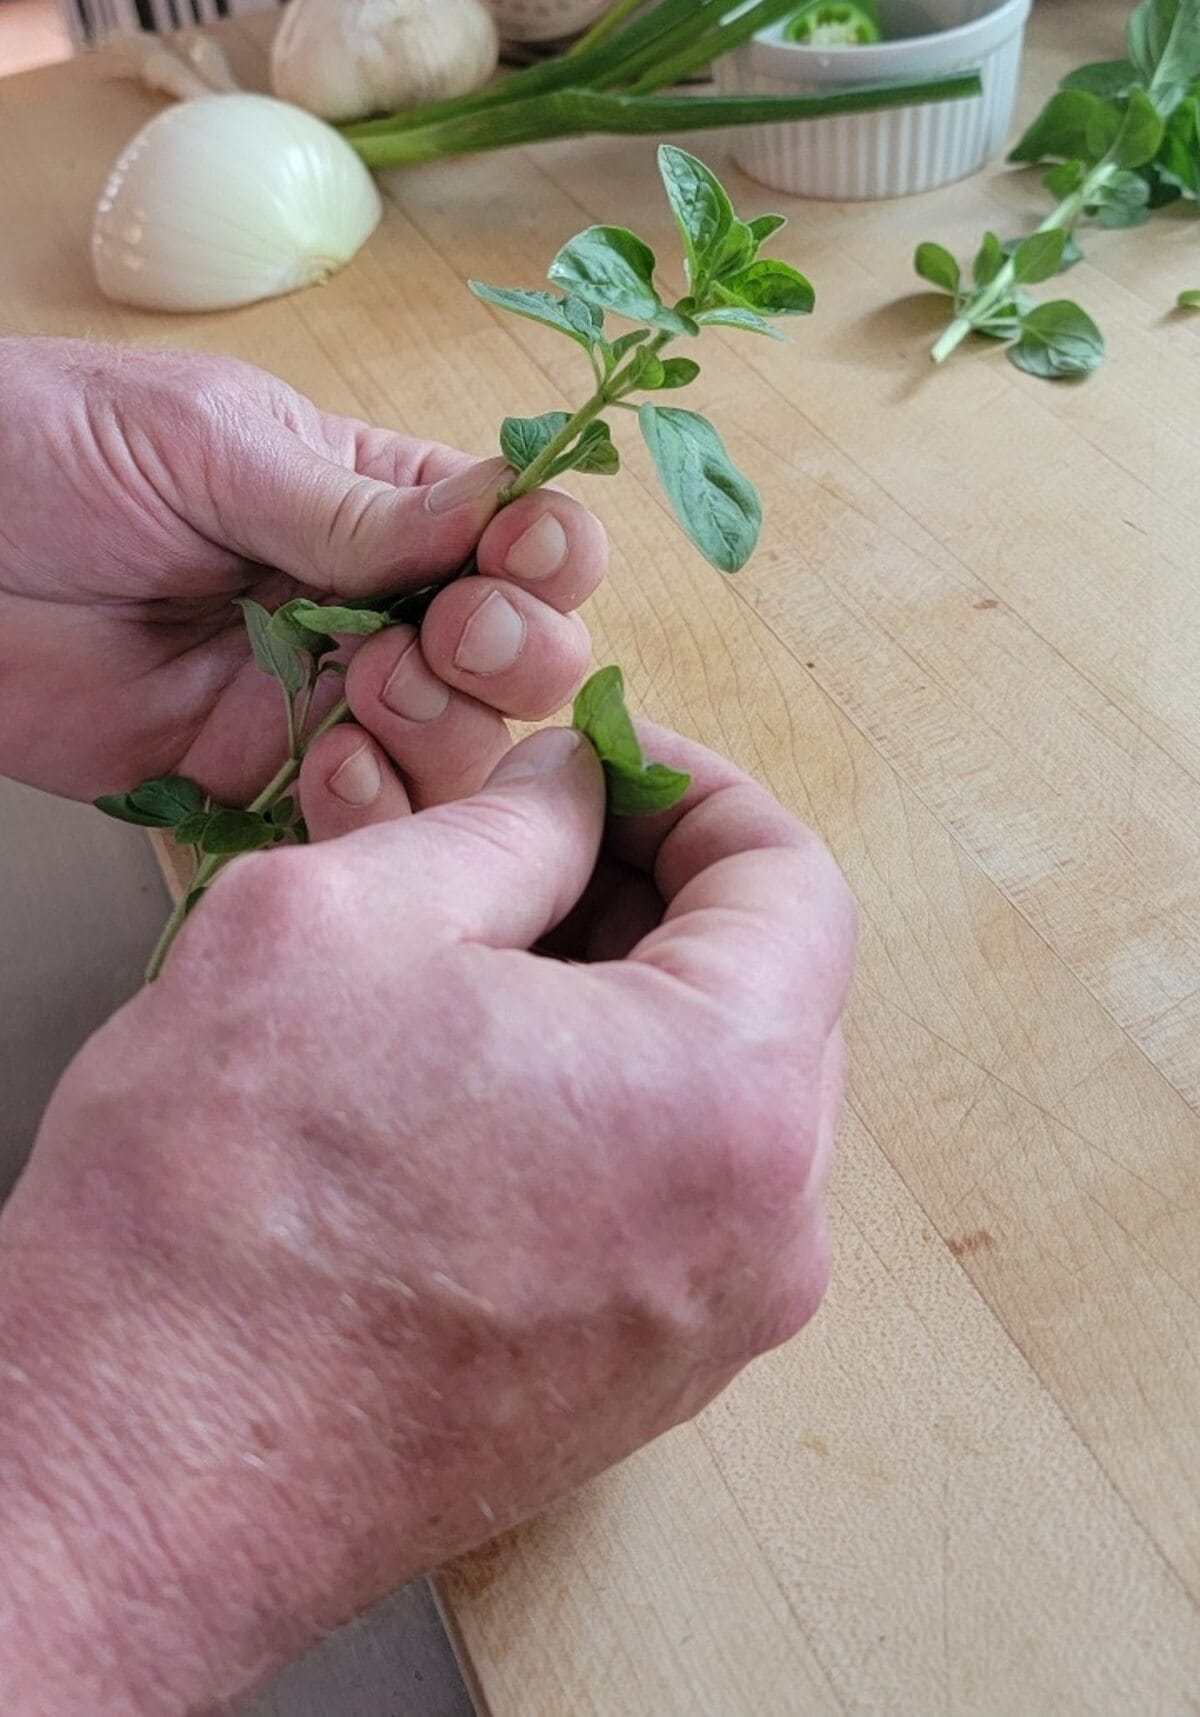 hands shown picking fresh oregano from the stem